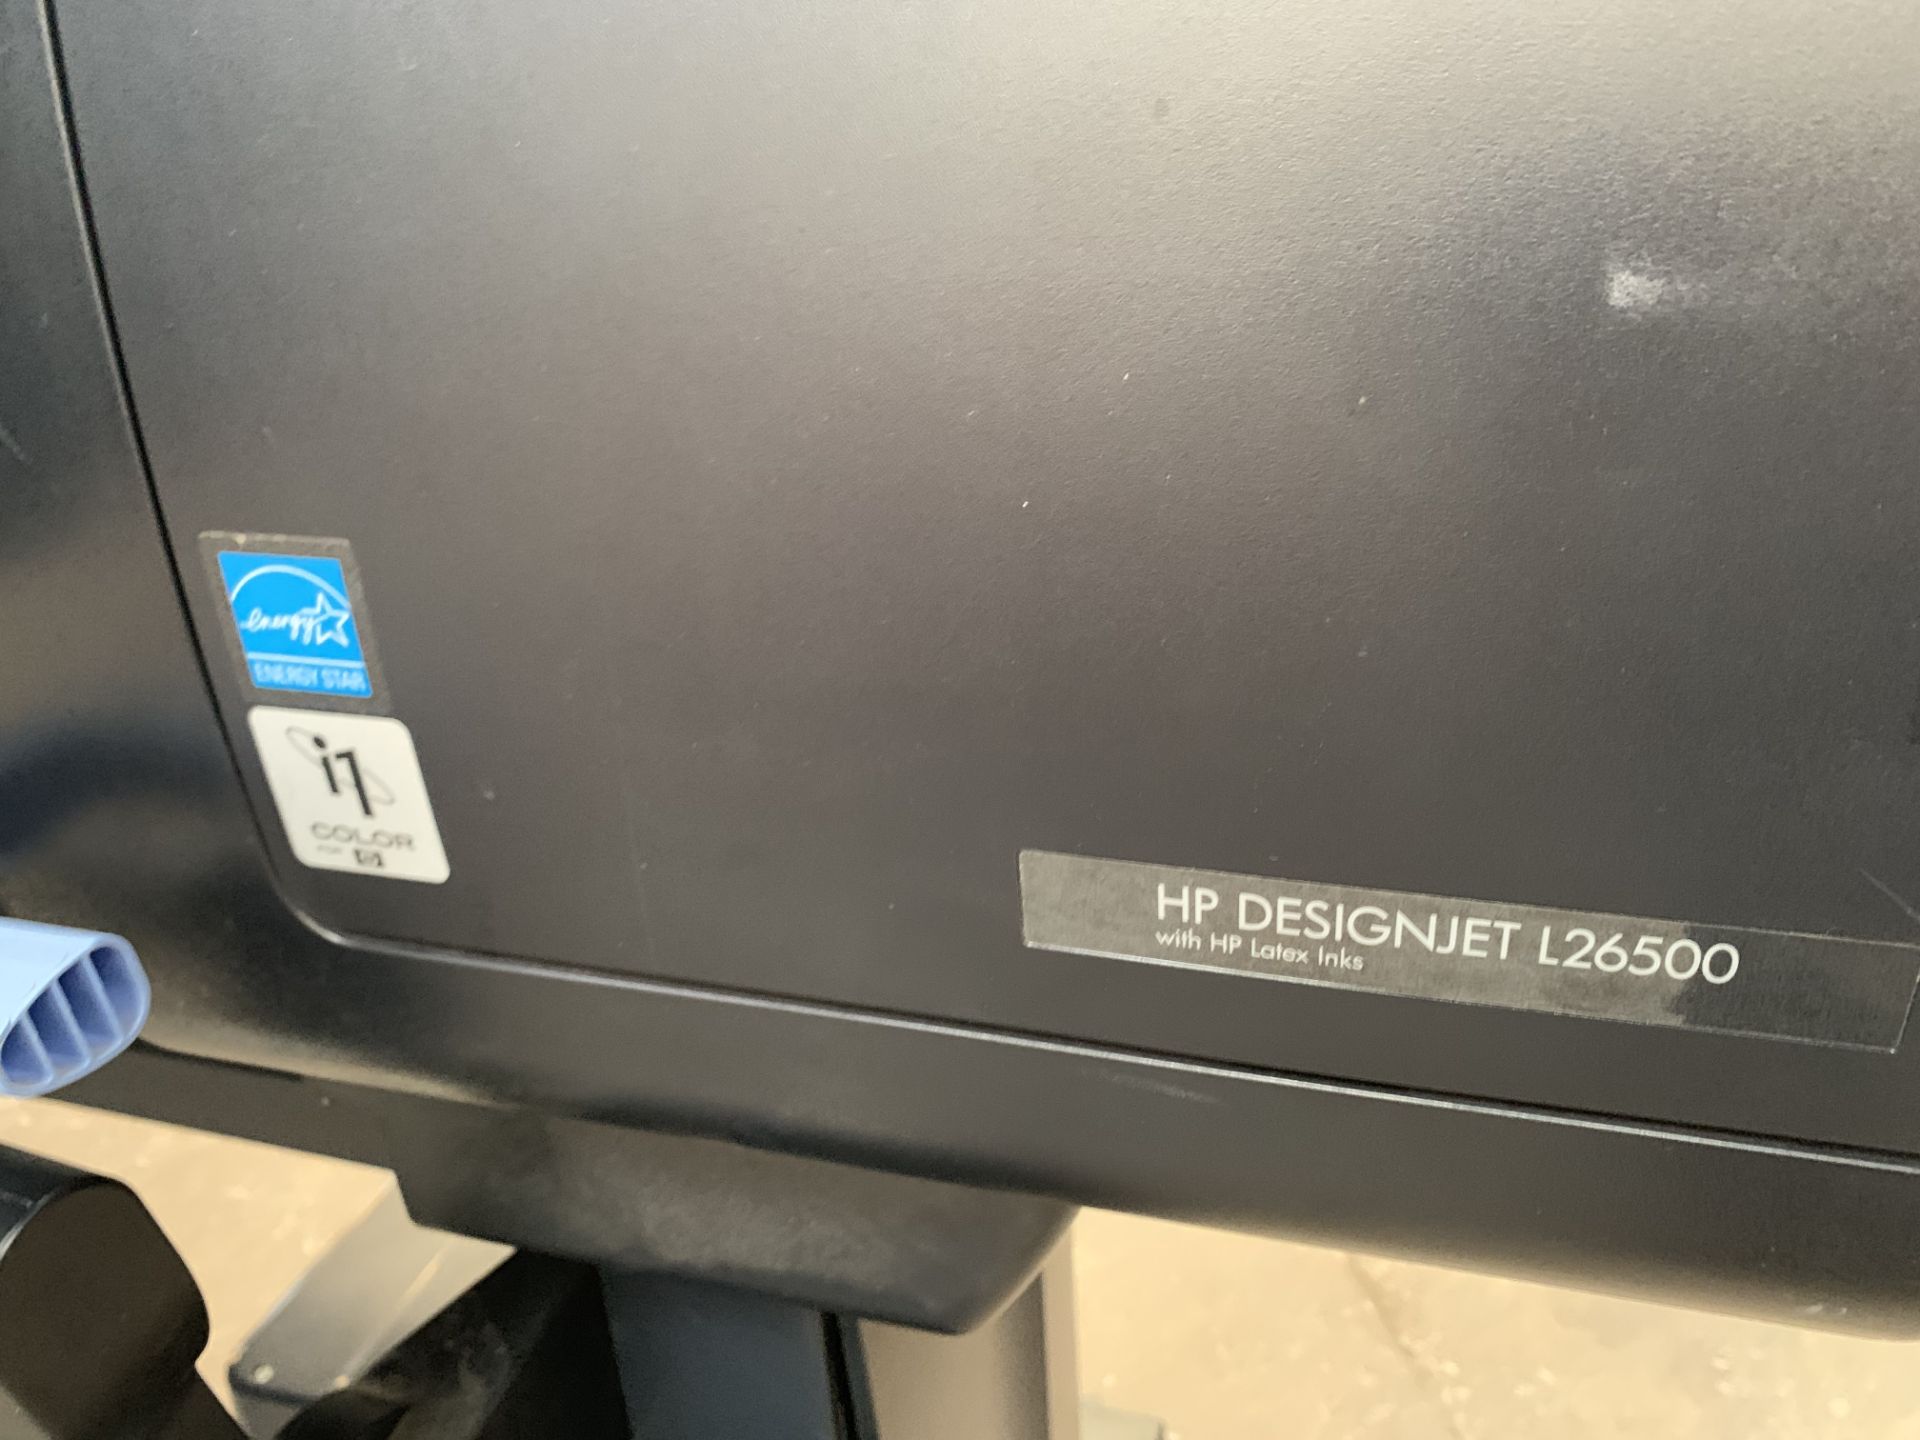 HP DesignJet L26500 wide format printer, for use with HP latex inks, factory code CQ869-64001. - Image 3 of 17